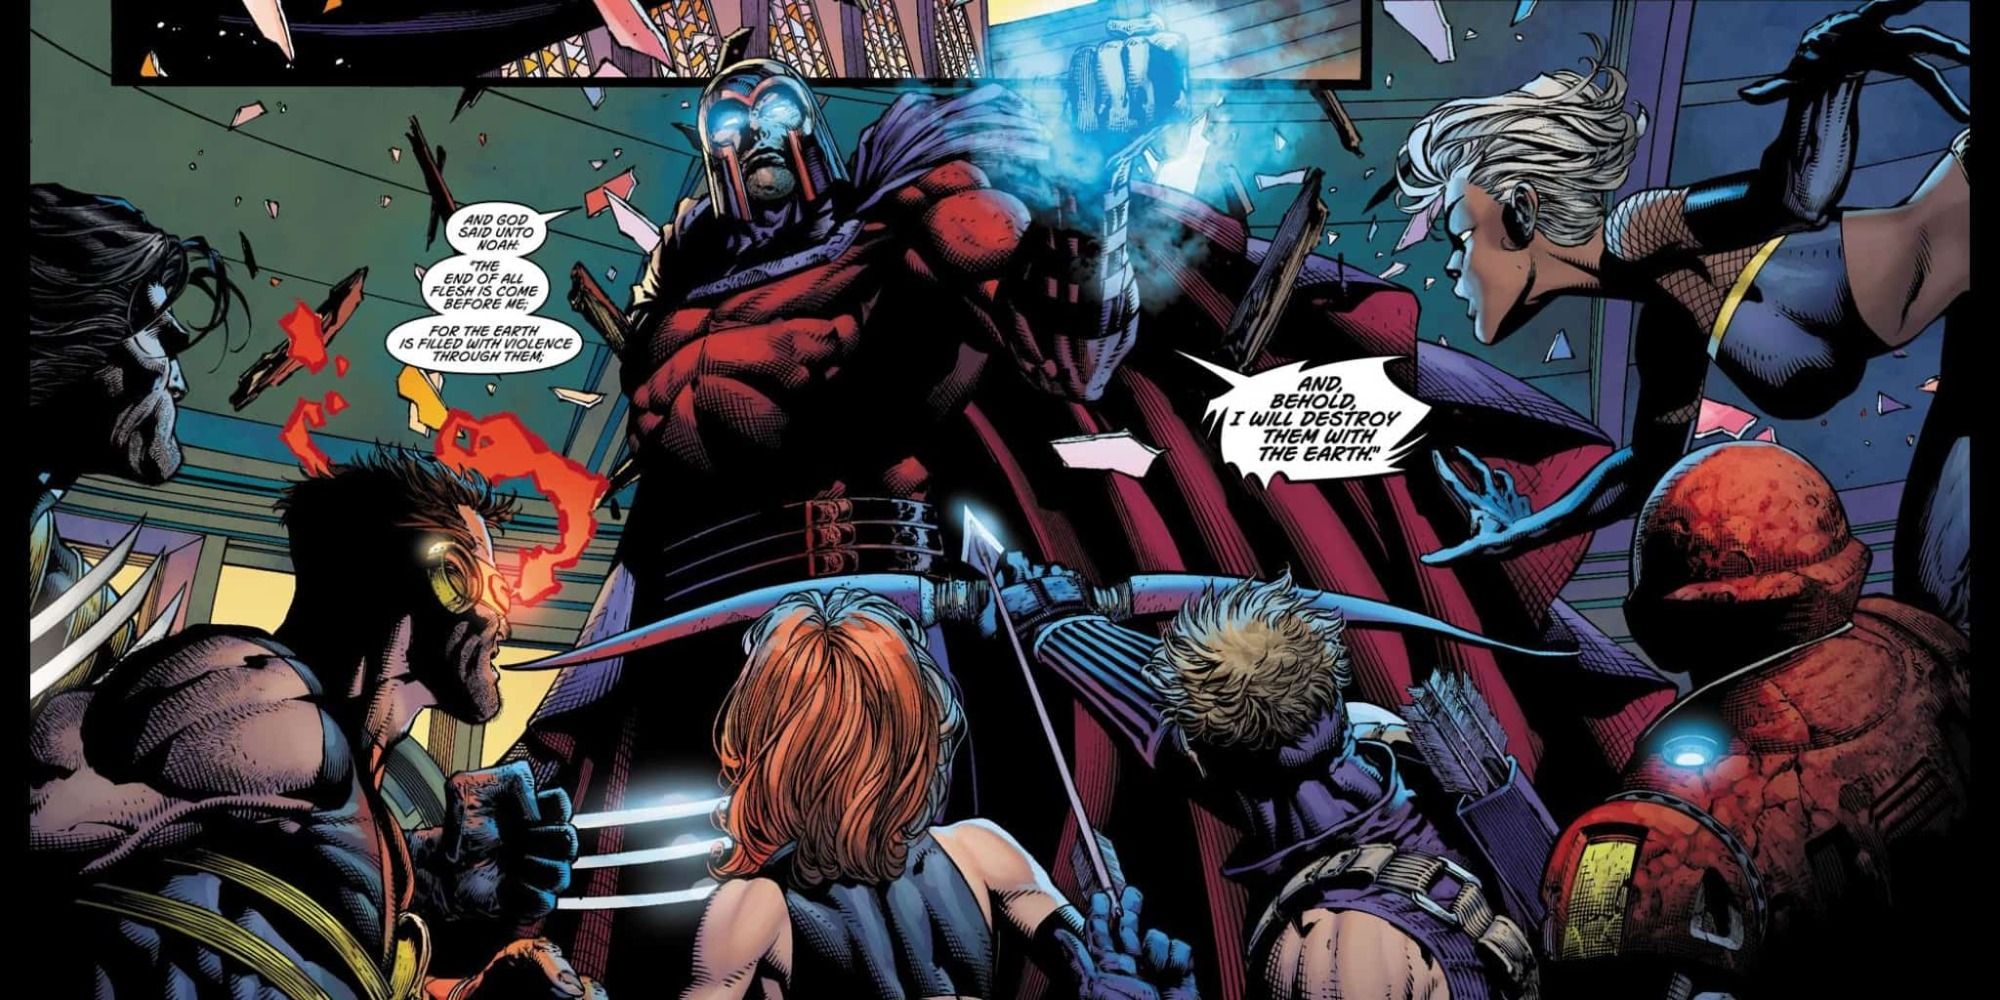 Magneto confronts the Avengers and X Men in Ultimate Comics.